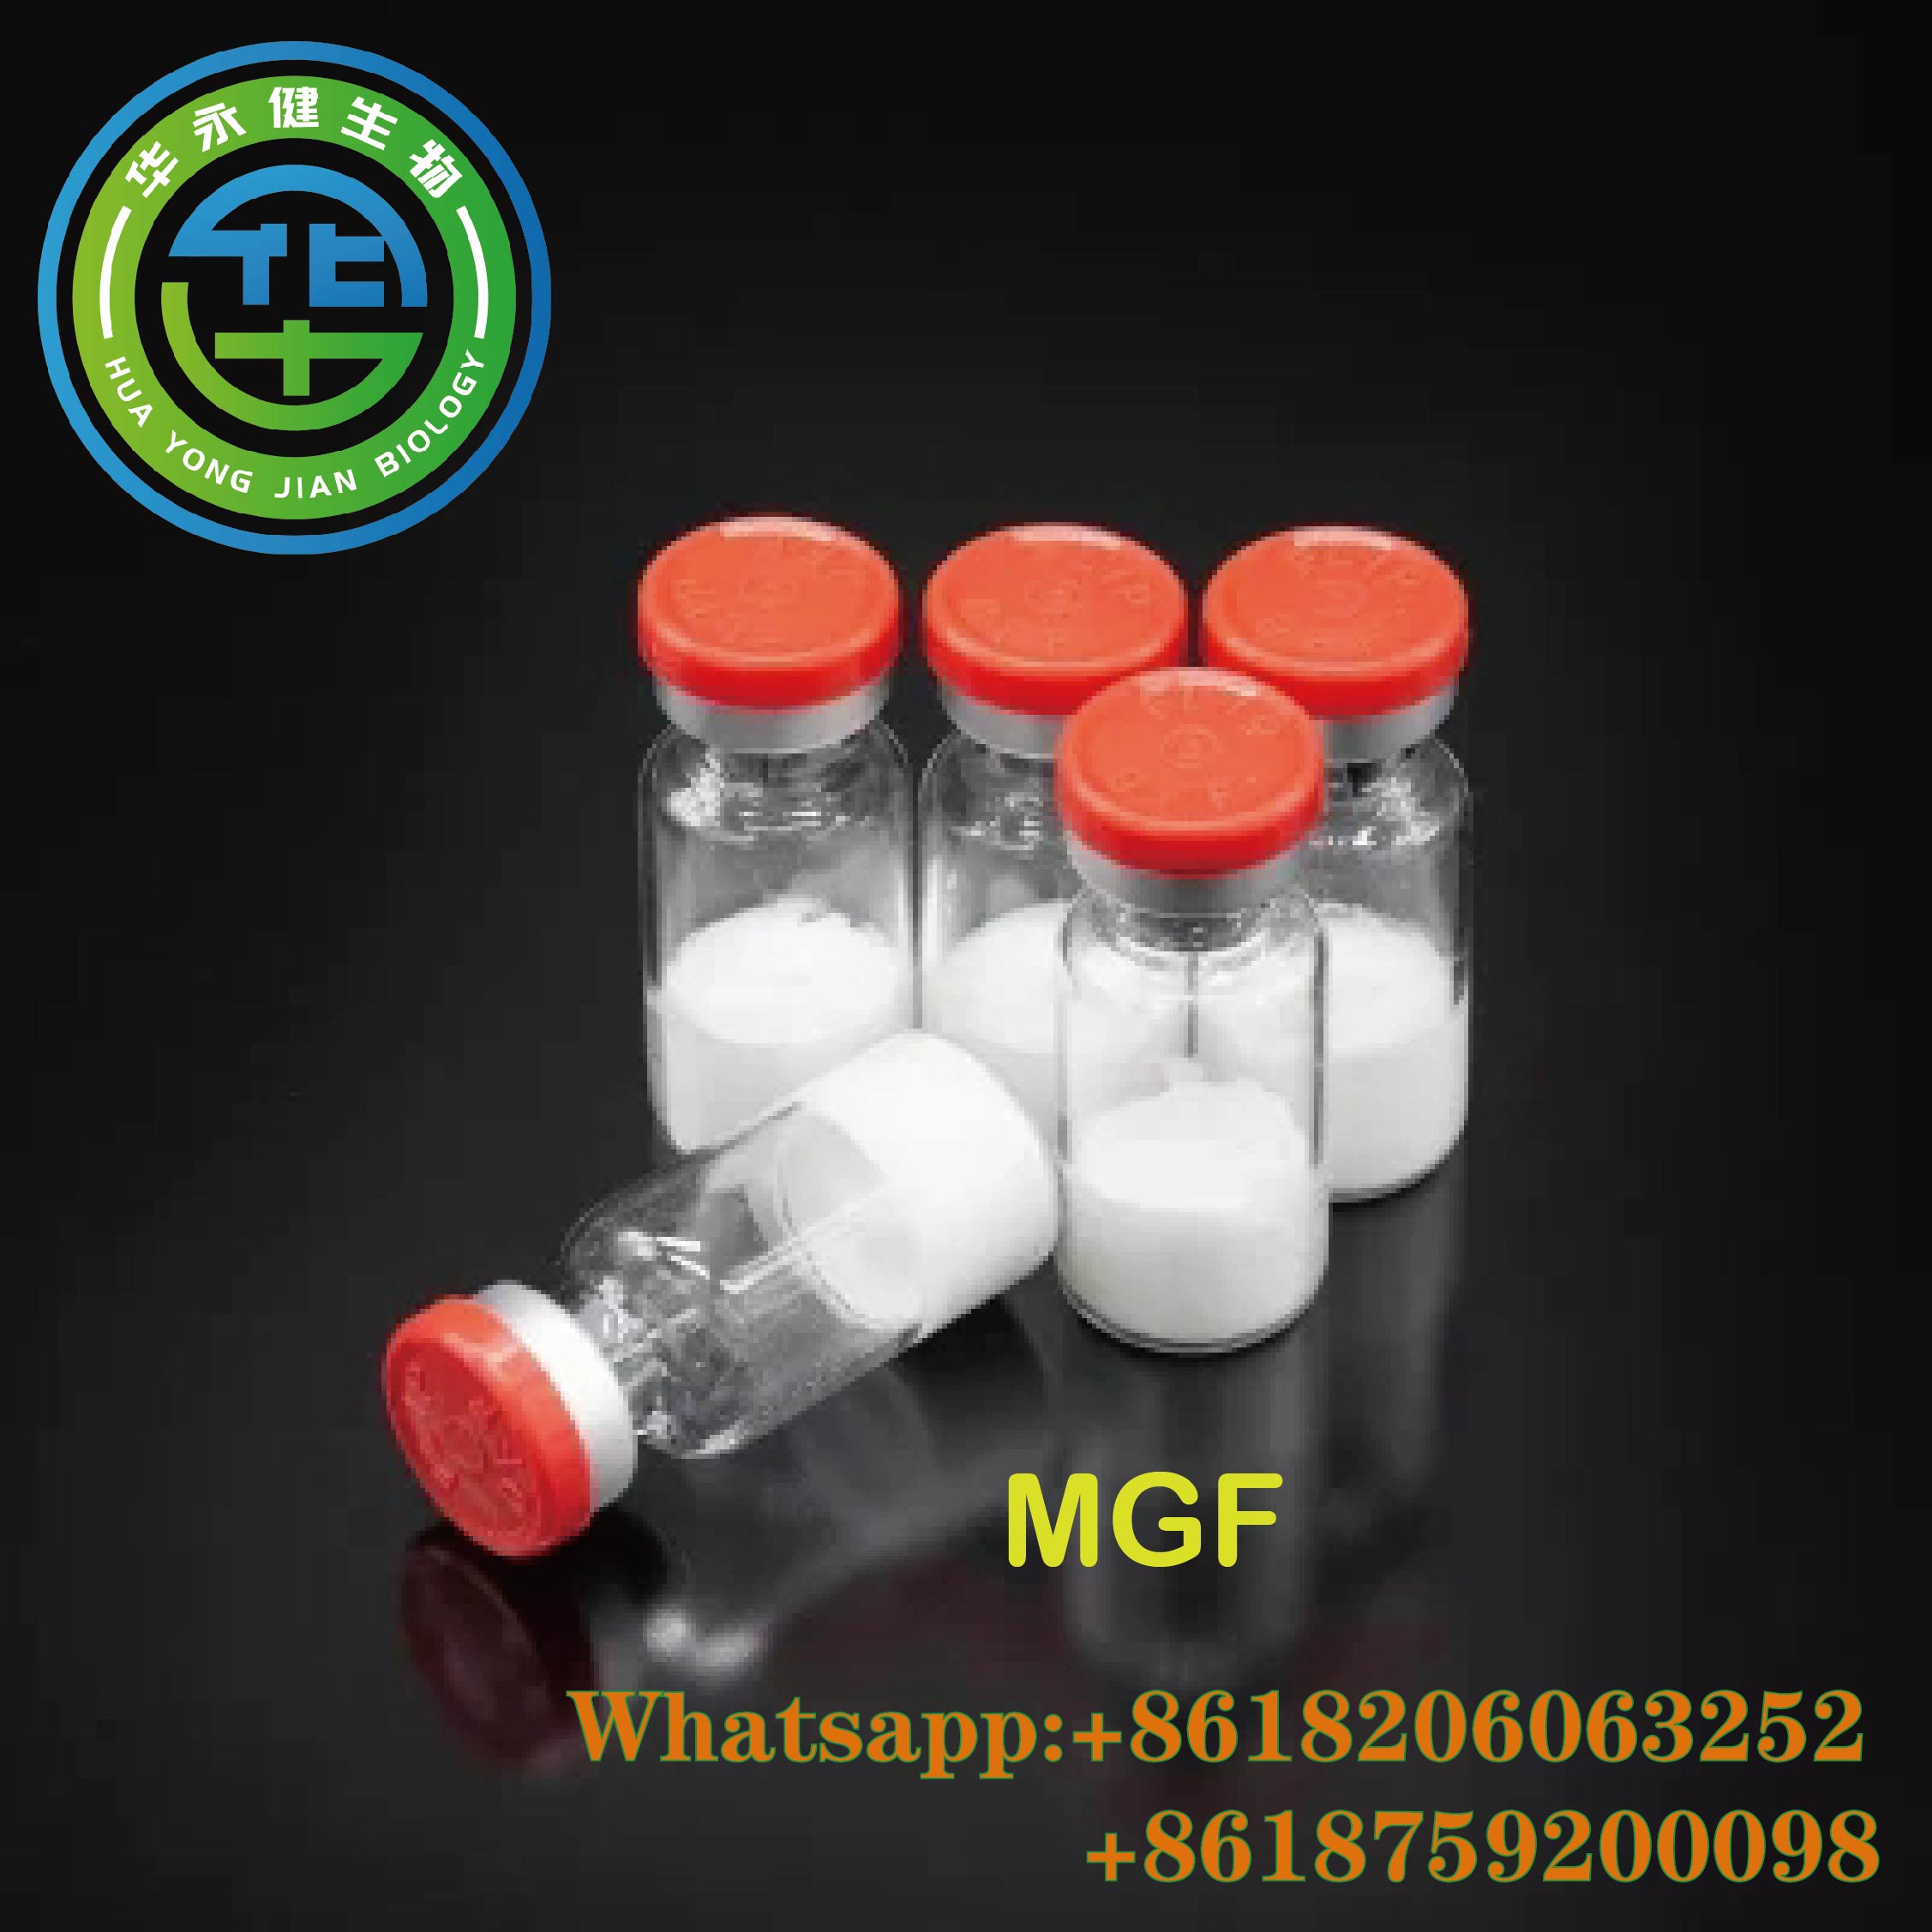 MGF Real High Purity Peptides Peptide CasNO.62031-54-3  for Bodybuilding 100% Delivery to America